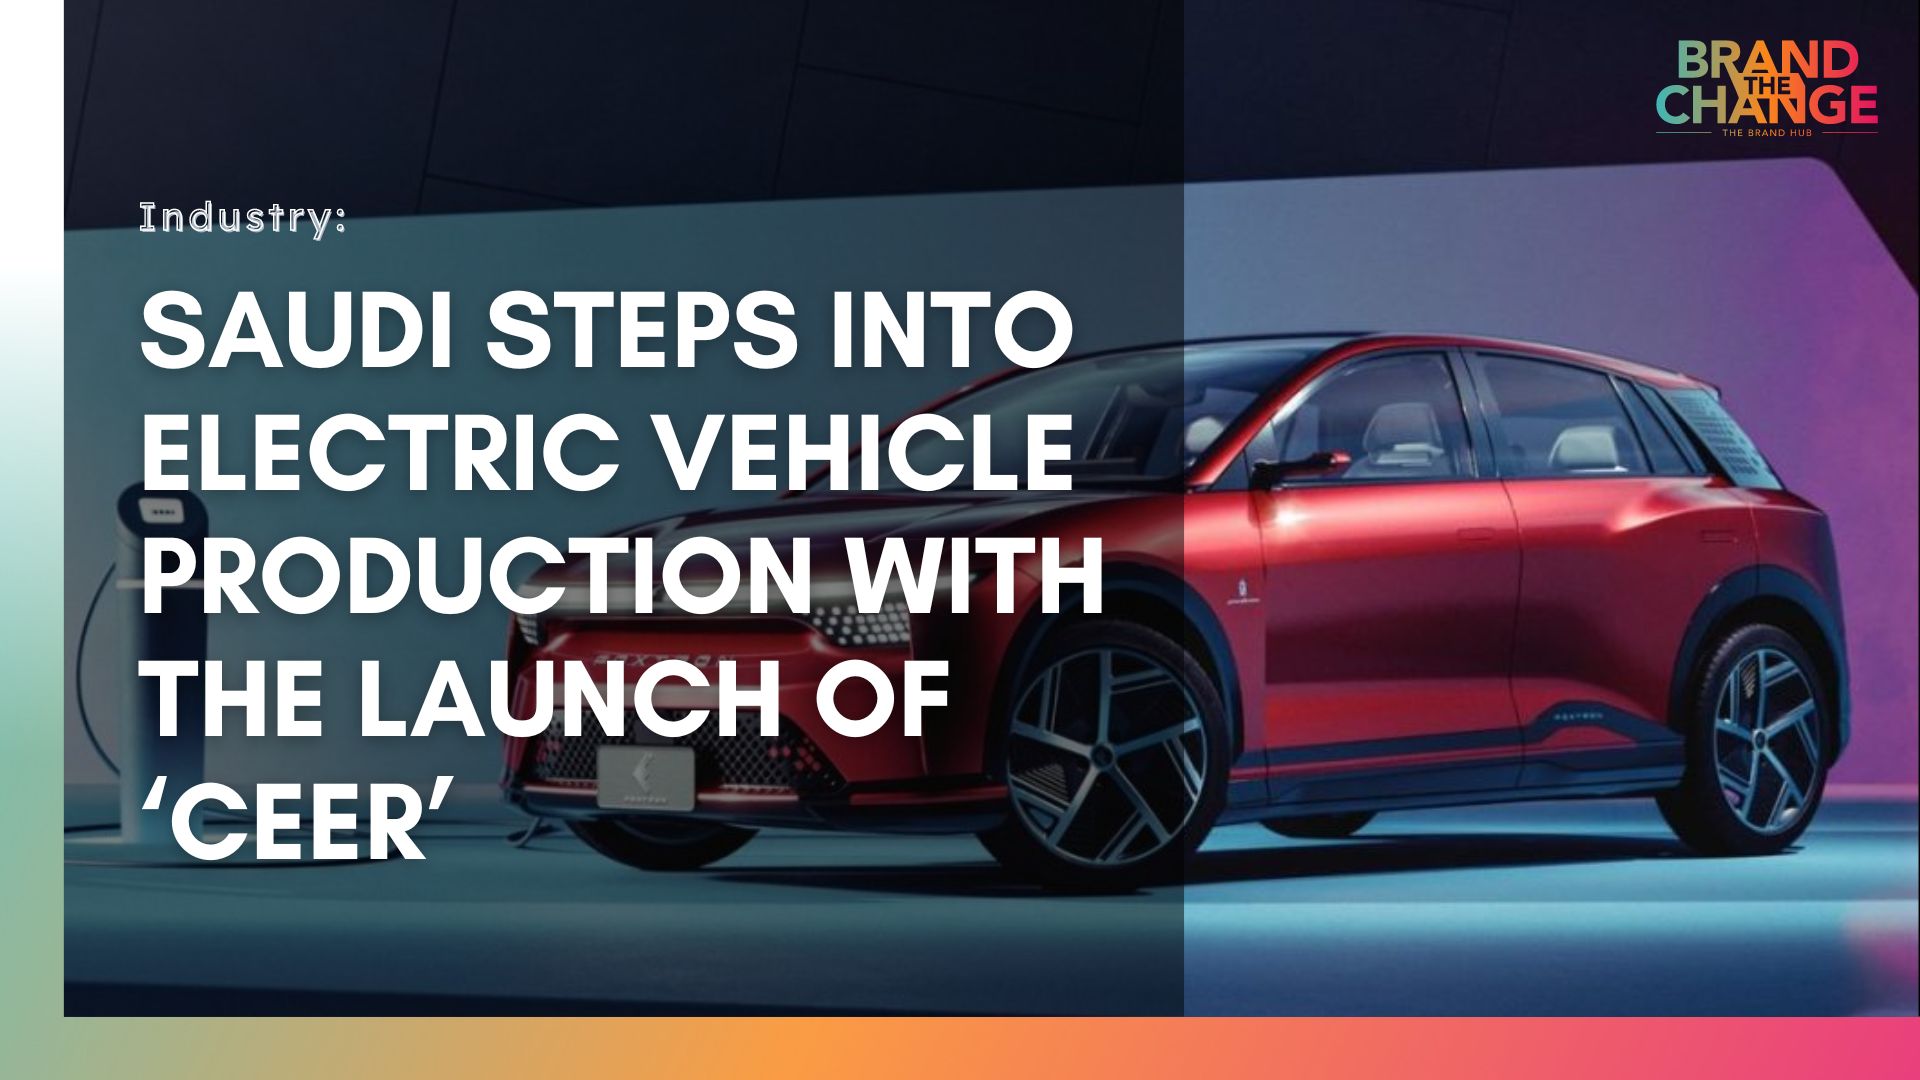 Saudi Steps into Electric Vehicle Production with the Launch of ‘Ceer